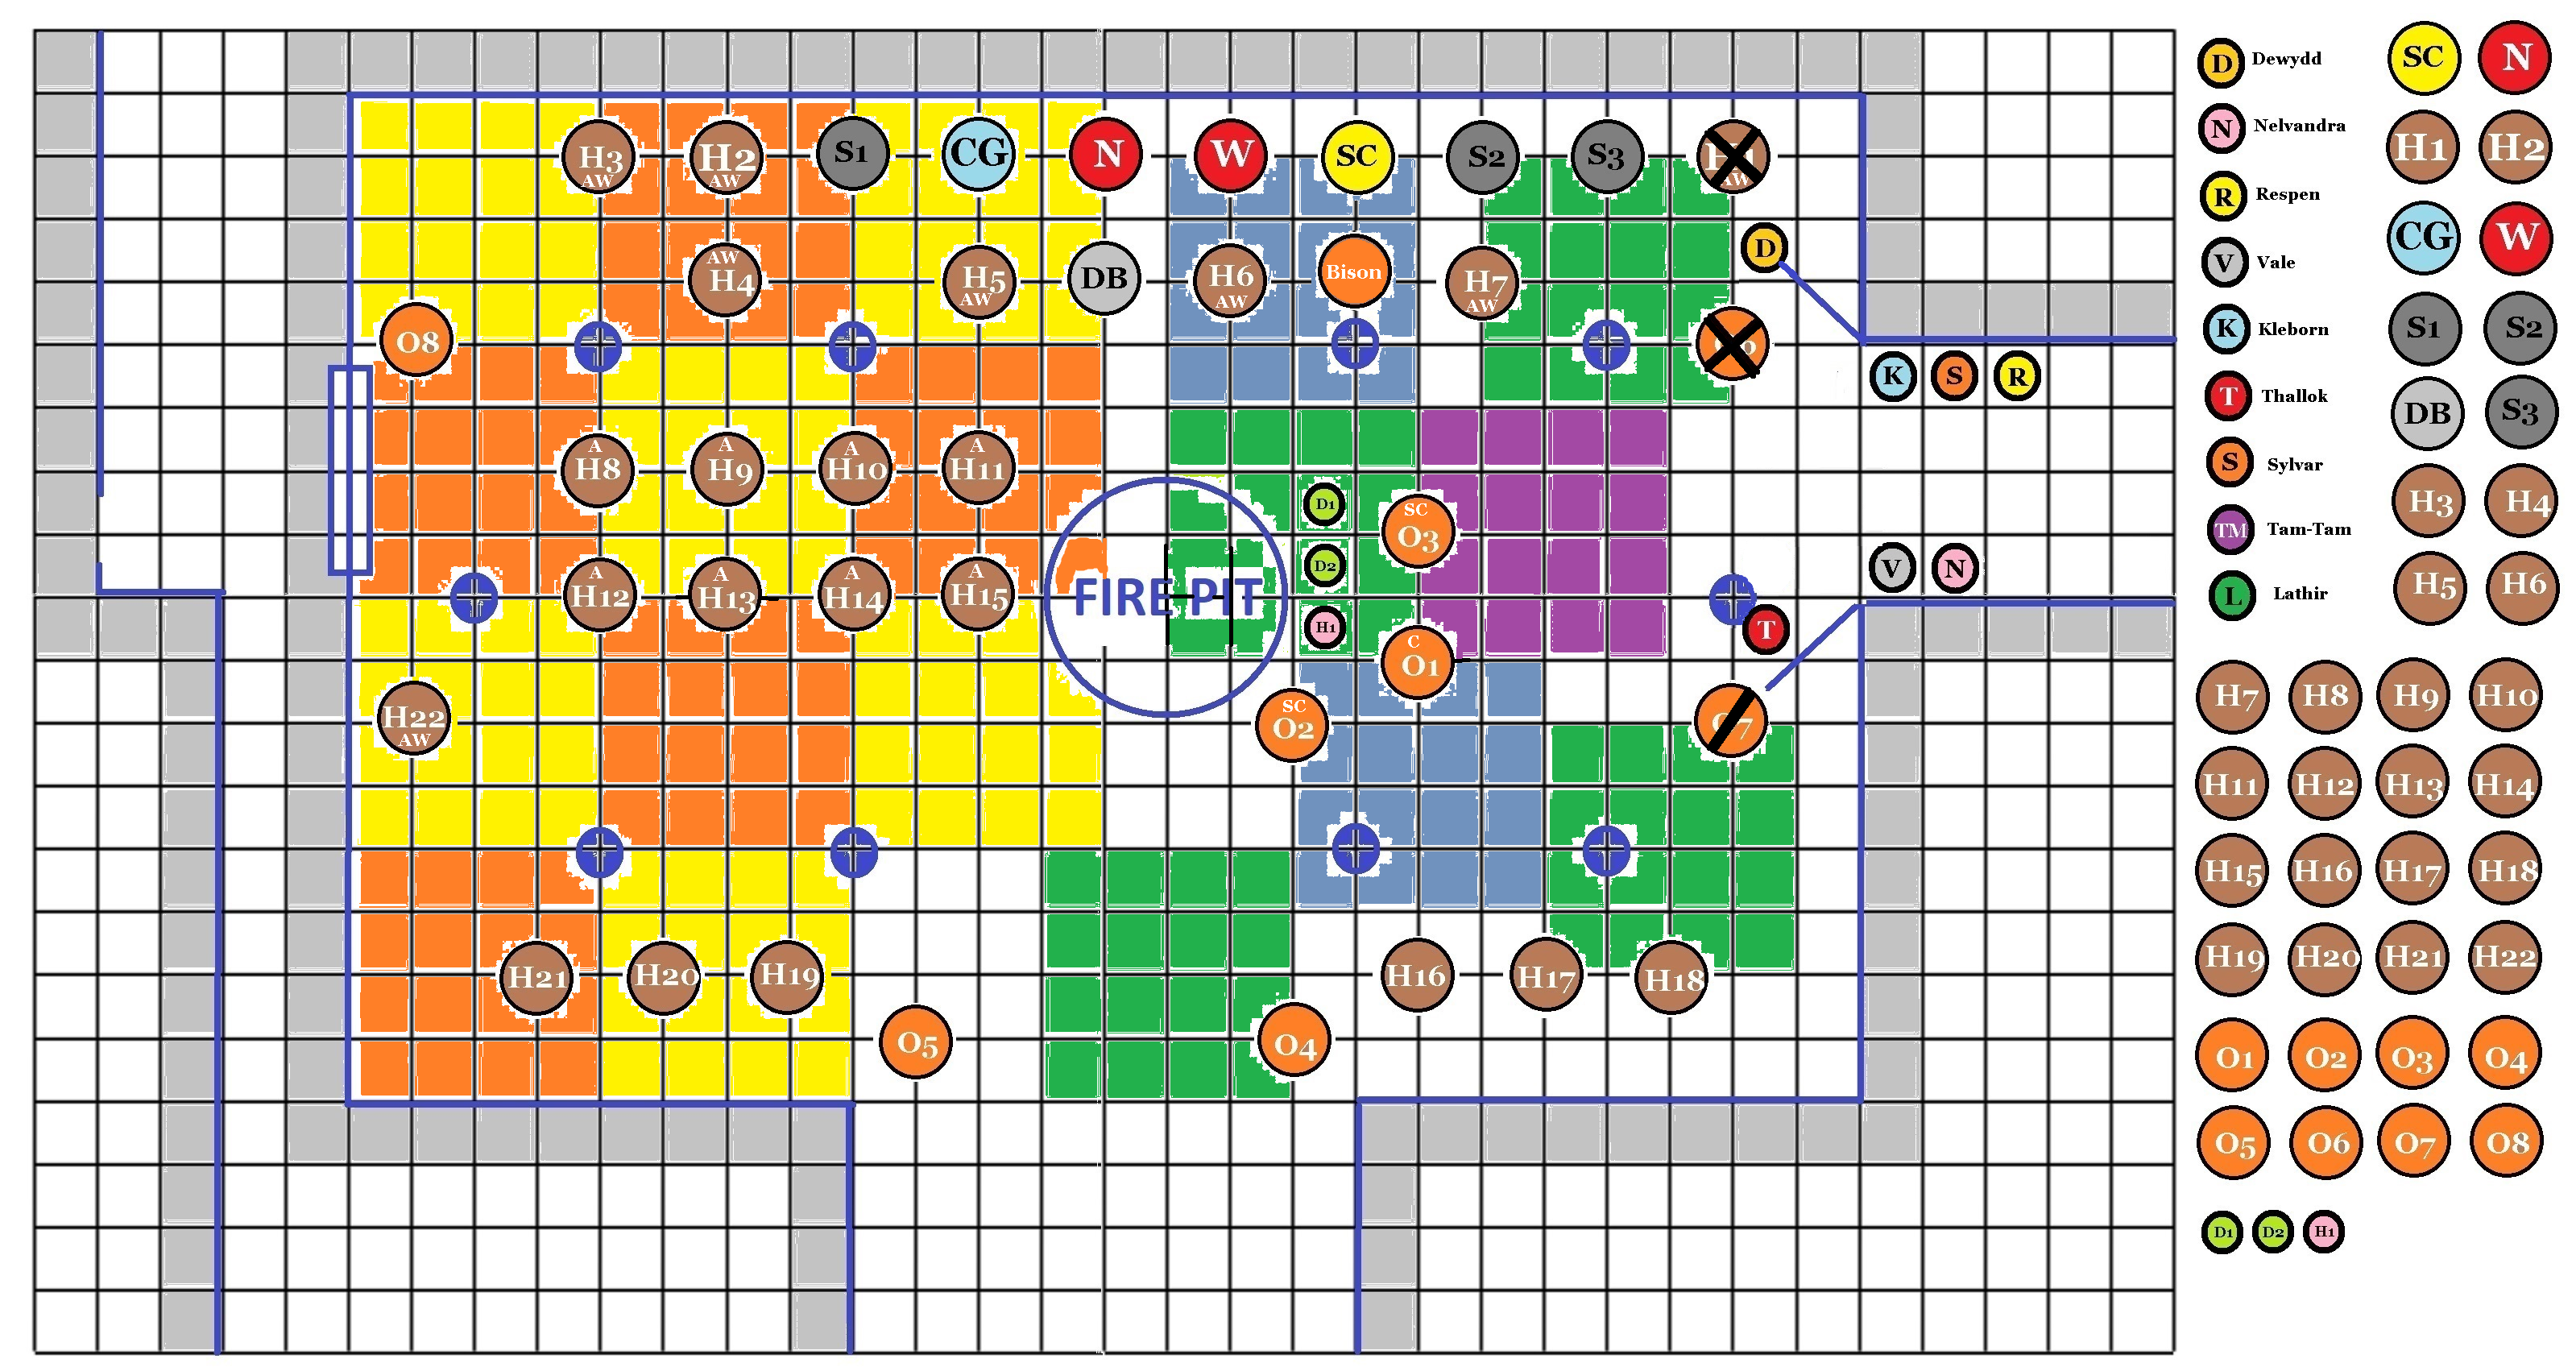 00-Big-Battle-Map-Giant-Great-Hall-001g4.png